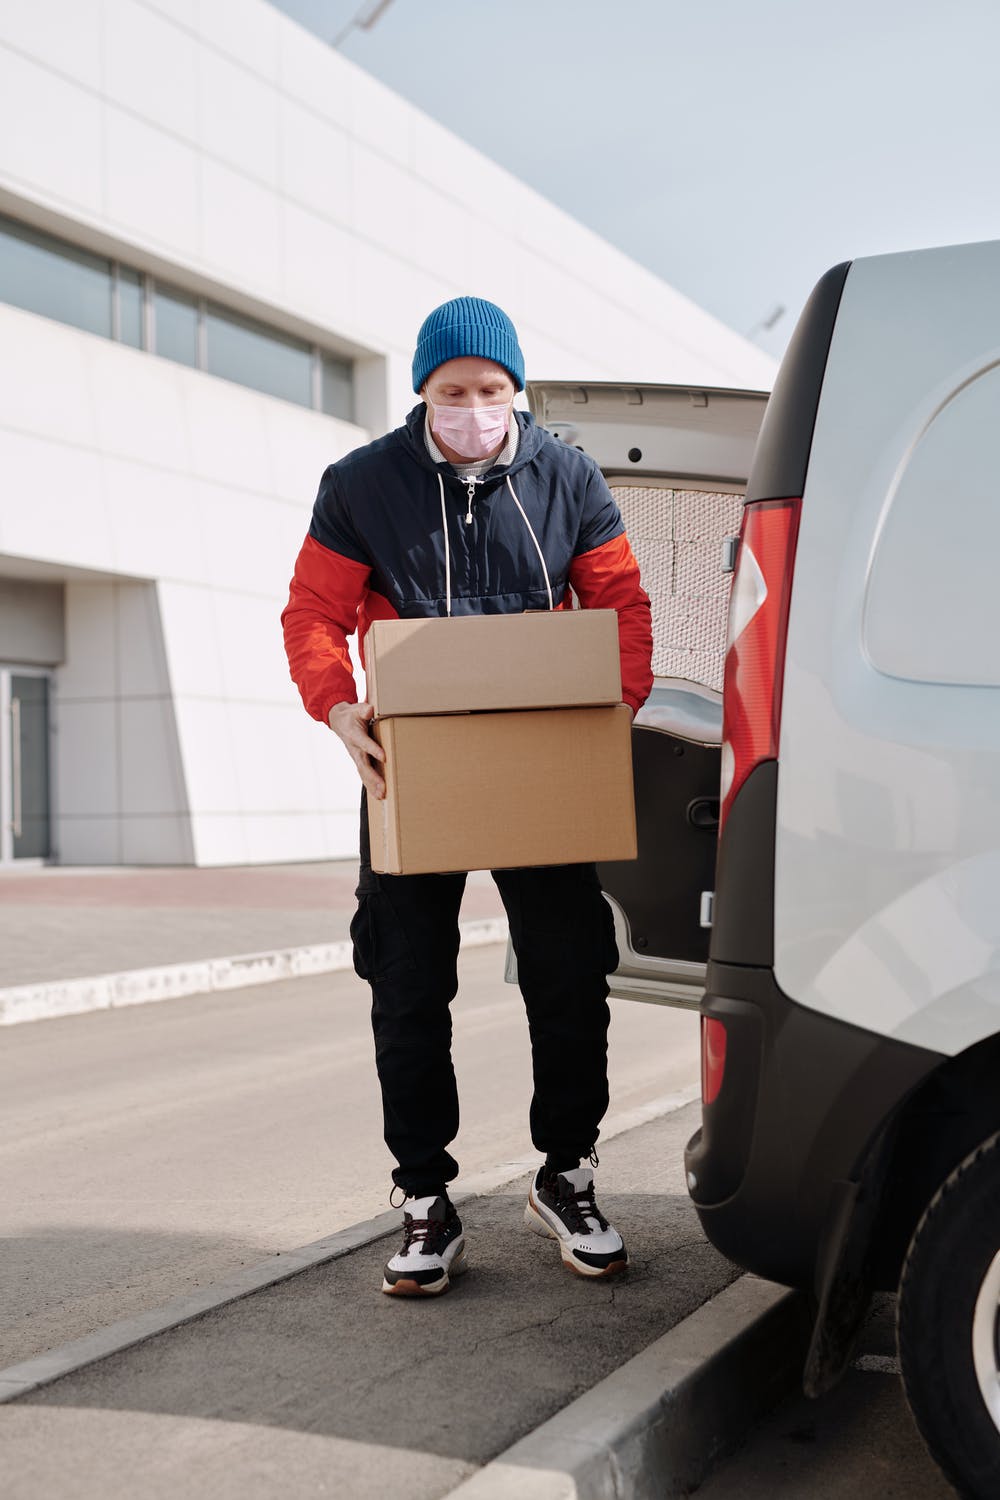 Same-day delivery: why choose Couriers Finder?